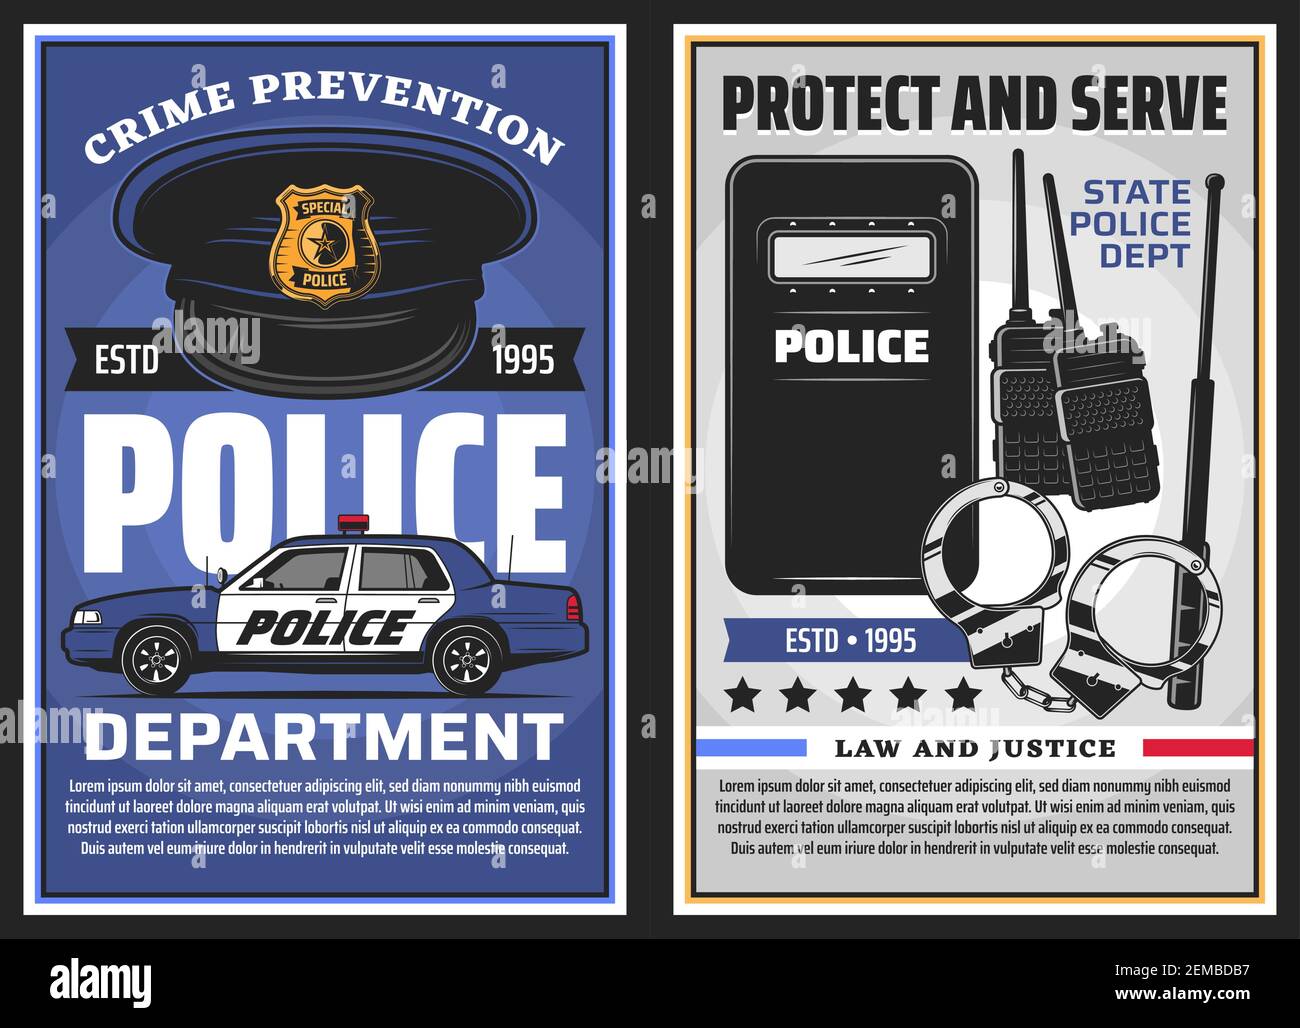 Police department serve and policing, law and justice vector design. Police officer uniform cap with badge, patrol car and handcuffs, baton, radio sca Stock Vector